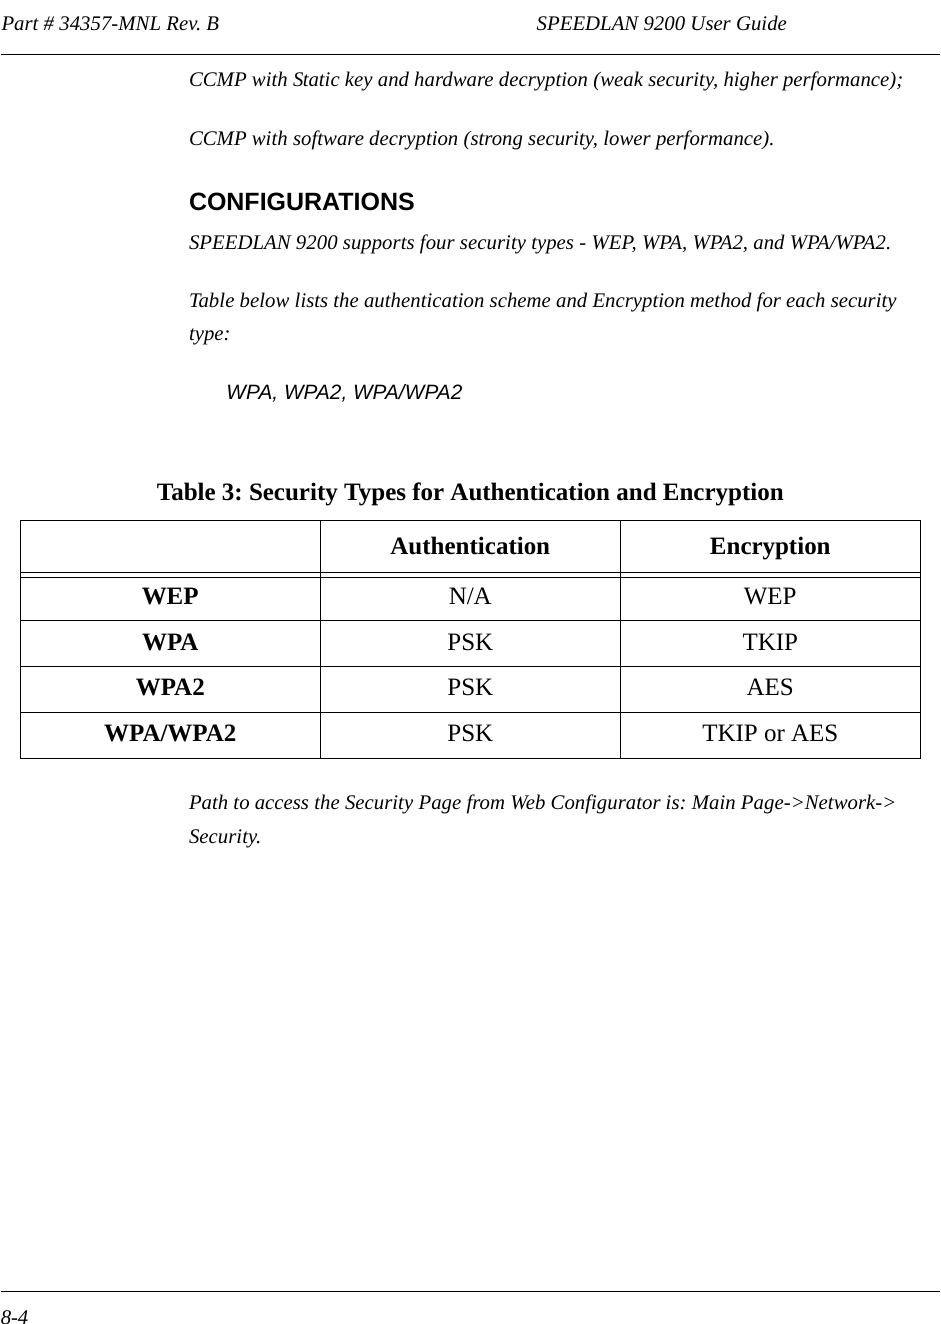 Part # 34357-MNL Rev. B                                                             SPEEDLAN 9200 User Guide 8-4CCMP with Static key and hardware decryption (weak security, higher performance);CCMP with software decryption (strong security, lower performance).CONFIGURATIONSSPEEDLAN 9200 supports four security types - WEP, WPA, WPA2, and WPA/WPA2. Table below lists the authentication scheme and Encryption method for each security type:WPA, WPA2, WPA/WPA2   Path to access the Security Page from Web Configurator is: Main Page-&gt;Network-&gt; Security.Table 3: Security Types for Authentication and EncryptionAuthentication EncryptionWEP N/A WEPWPA PSK TKIPWPA2 PSK AESWPA/WPA2 PSK TKIP or AES